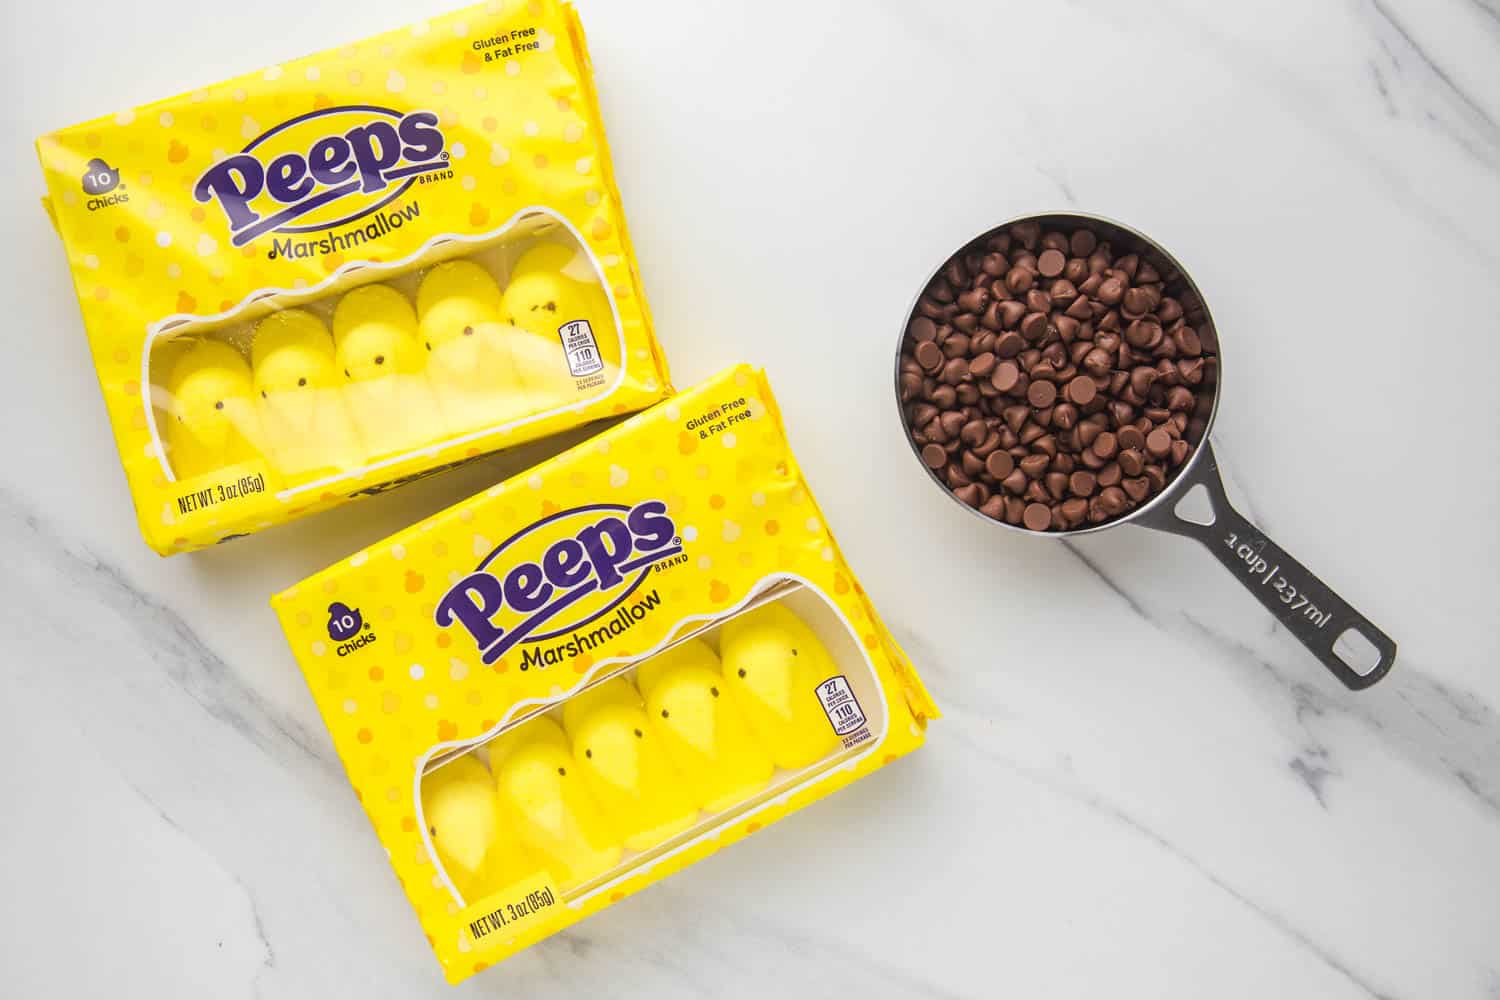 Two packages of peeps and a half cup full of chocolate chips on a counter